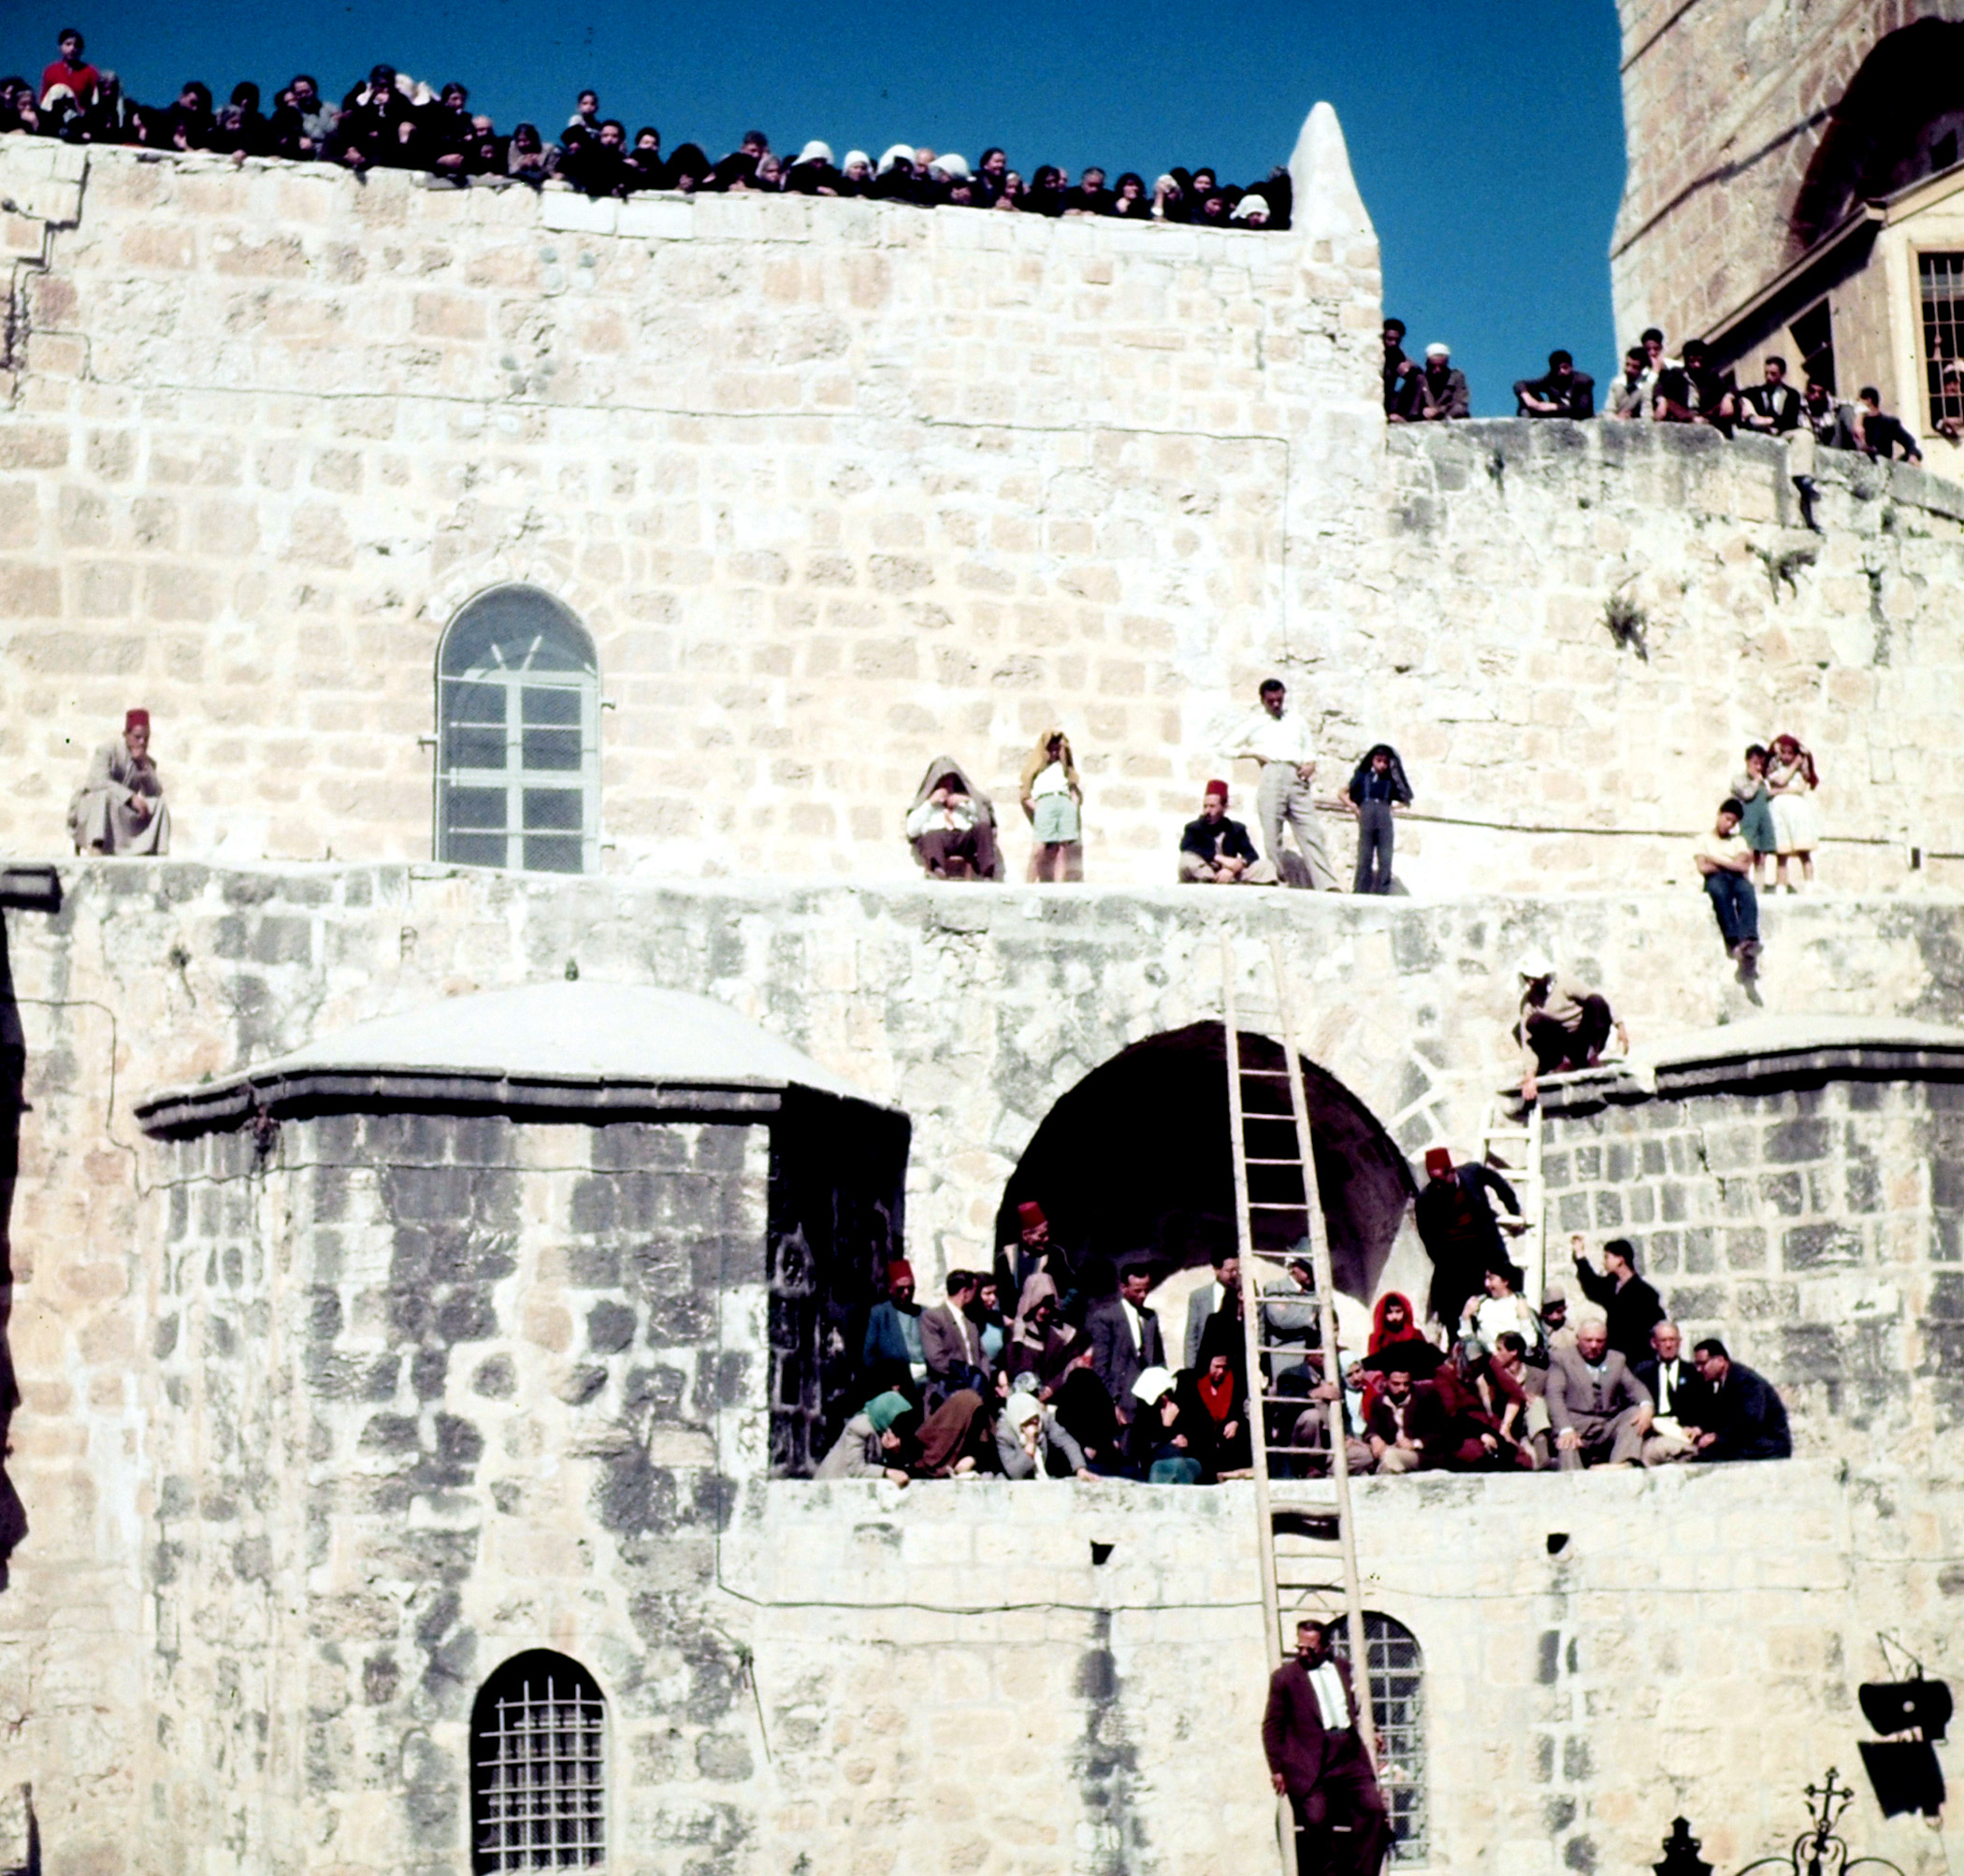 Easter in the Holy Land, 1955.